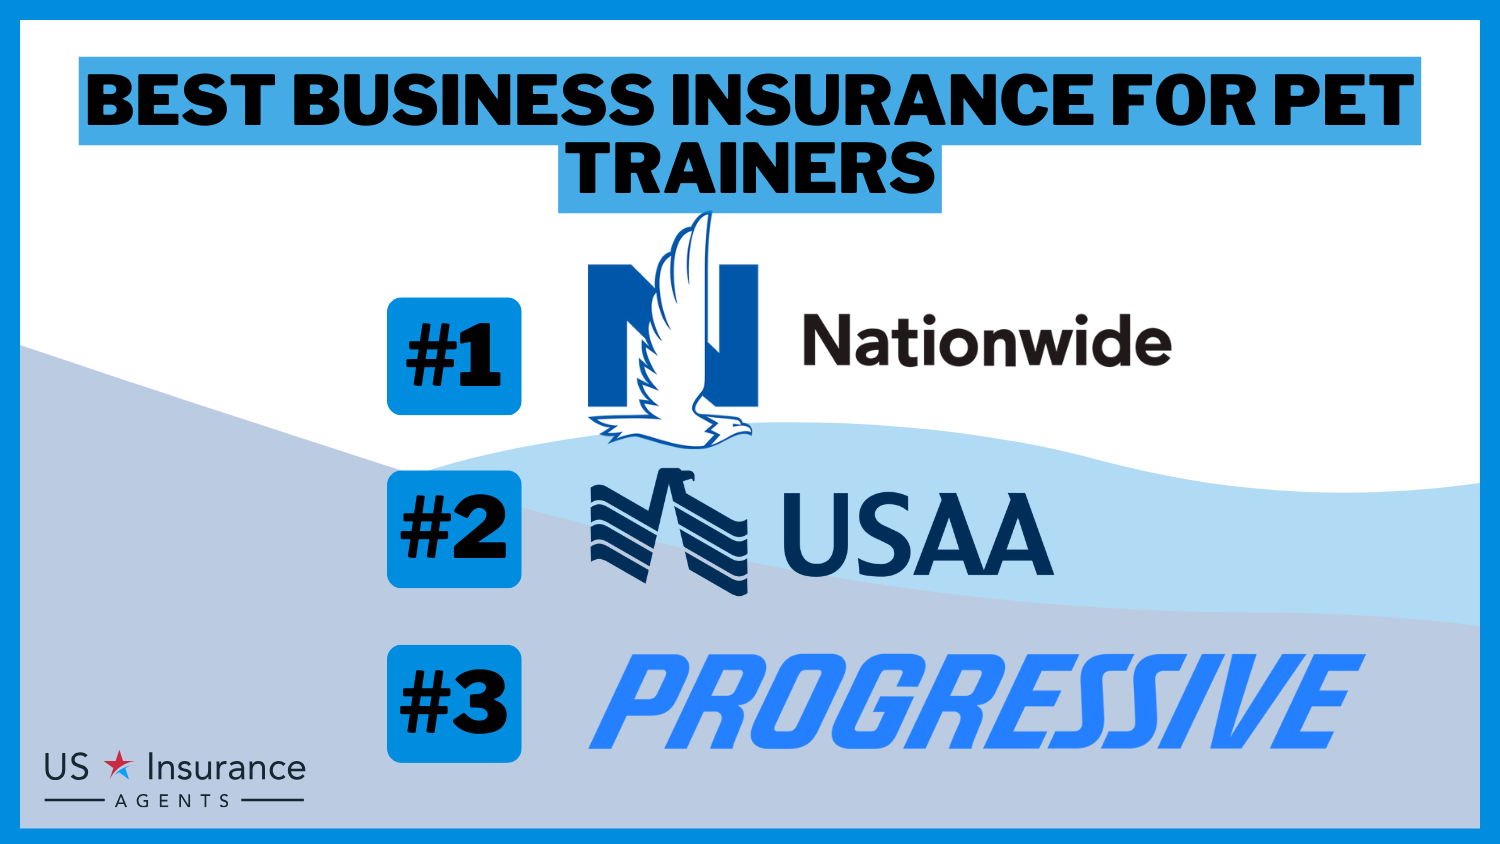 3 Best Business Insurance for Pet Trainers: Nationwide, USAA and Progressive.